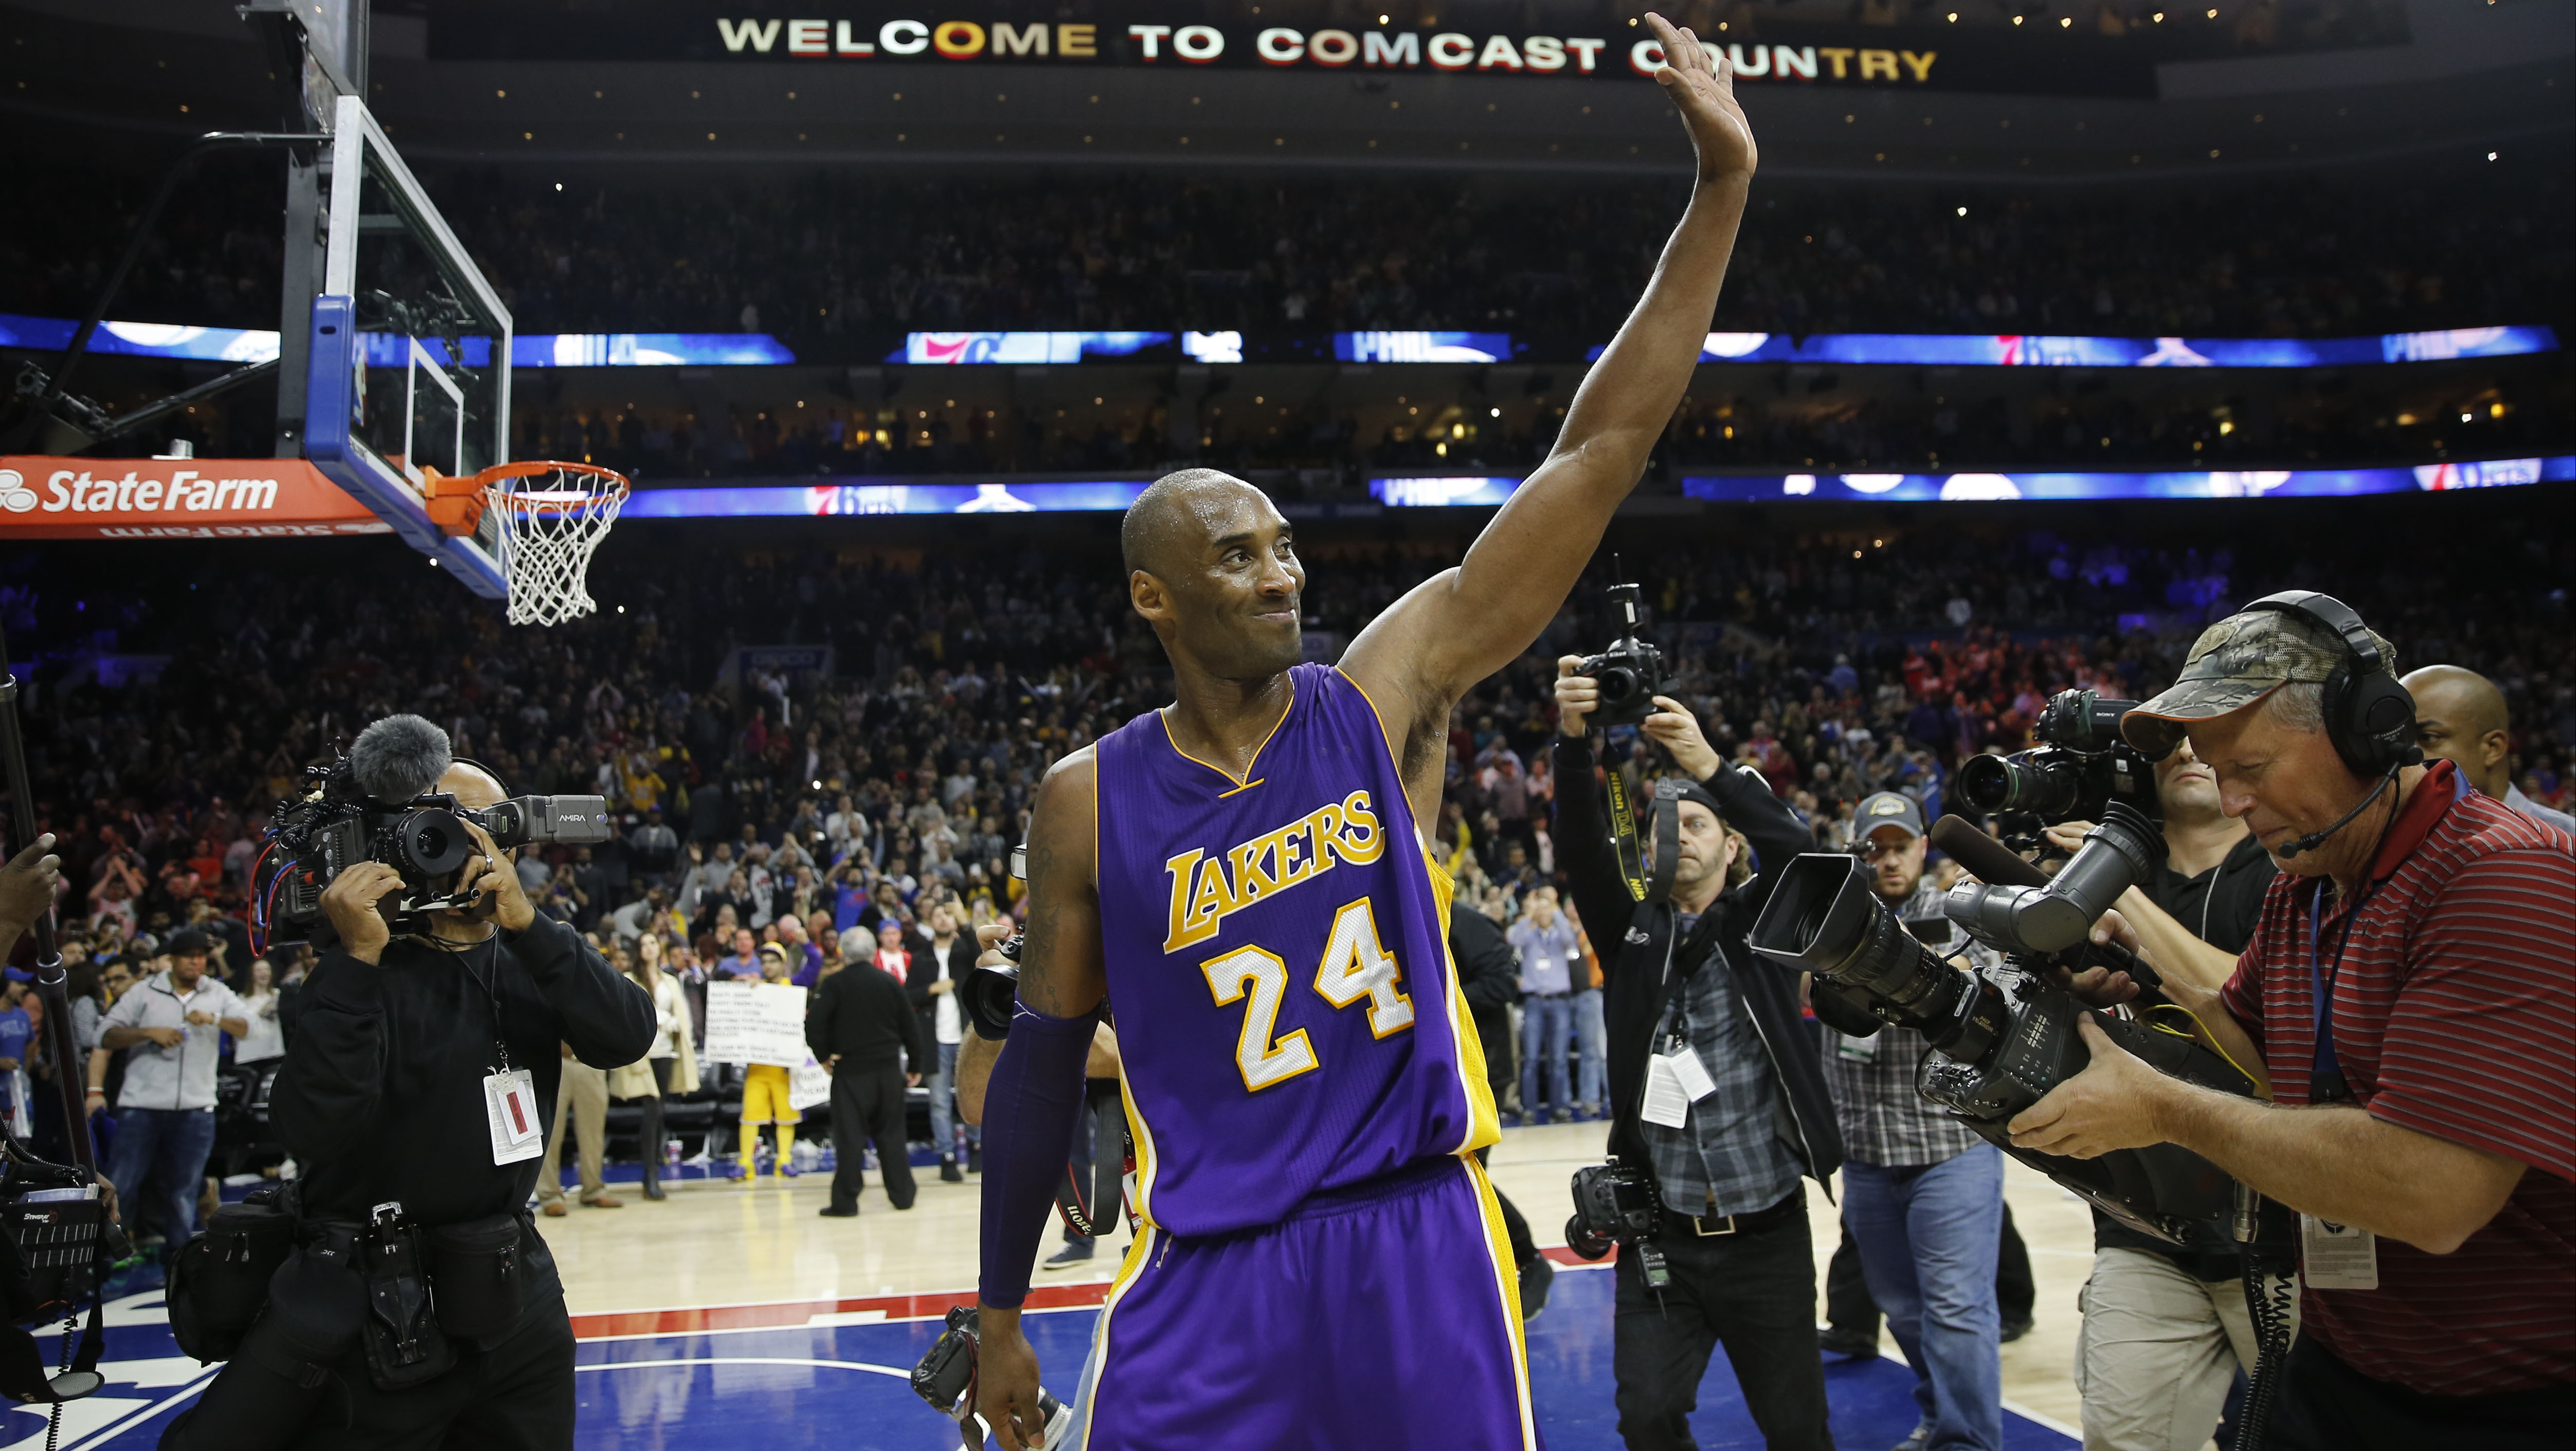 Kobe Bryant will be inducted into Basketball Hall of Fame this